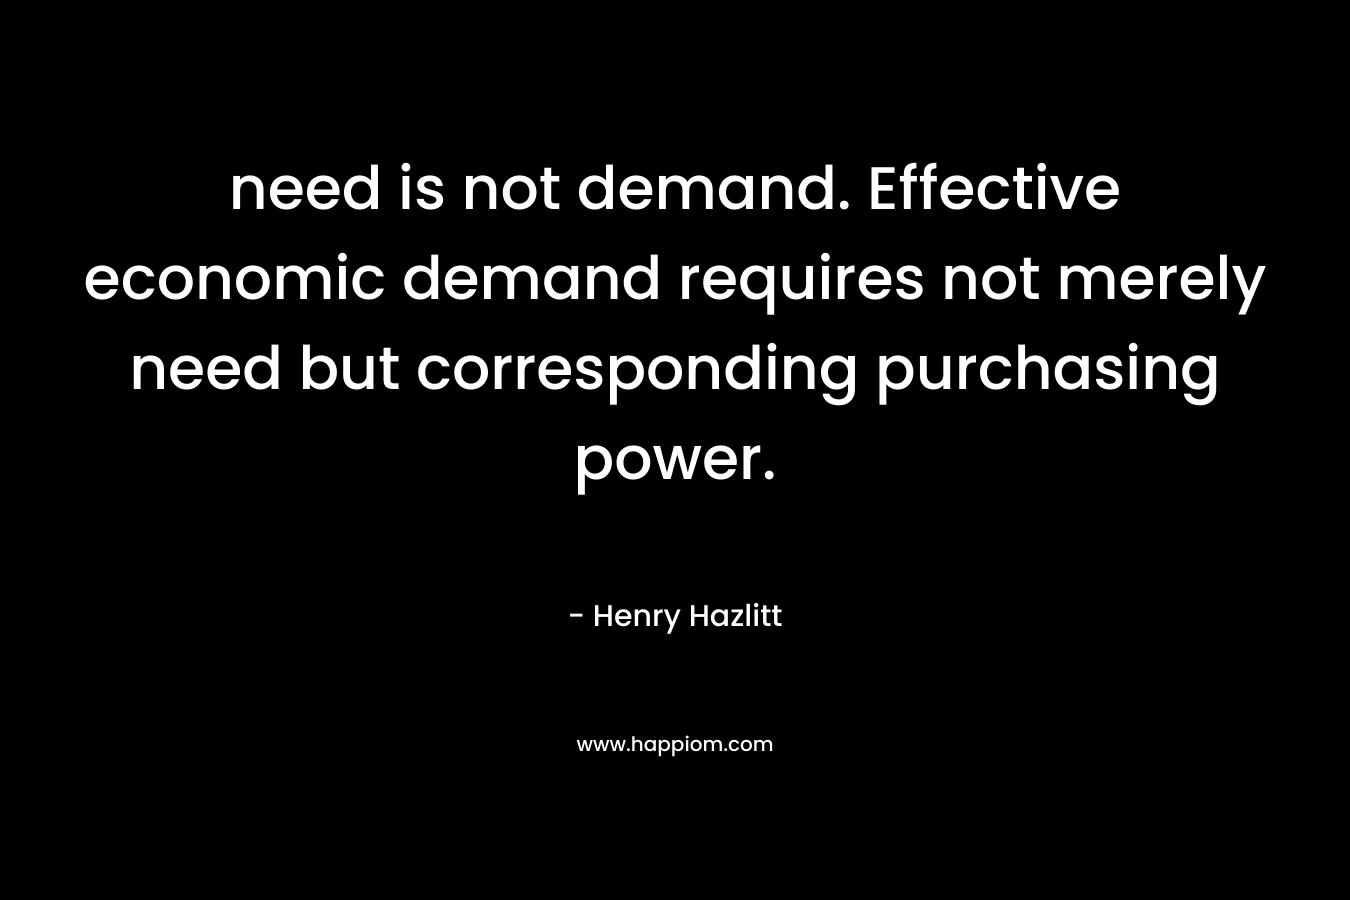 need is not demand. Effective economic demand requires not merely need but corresponding purchasing power.